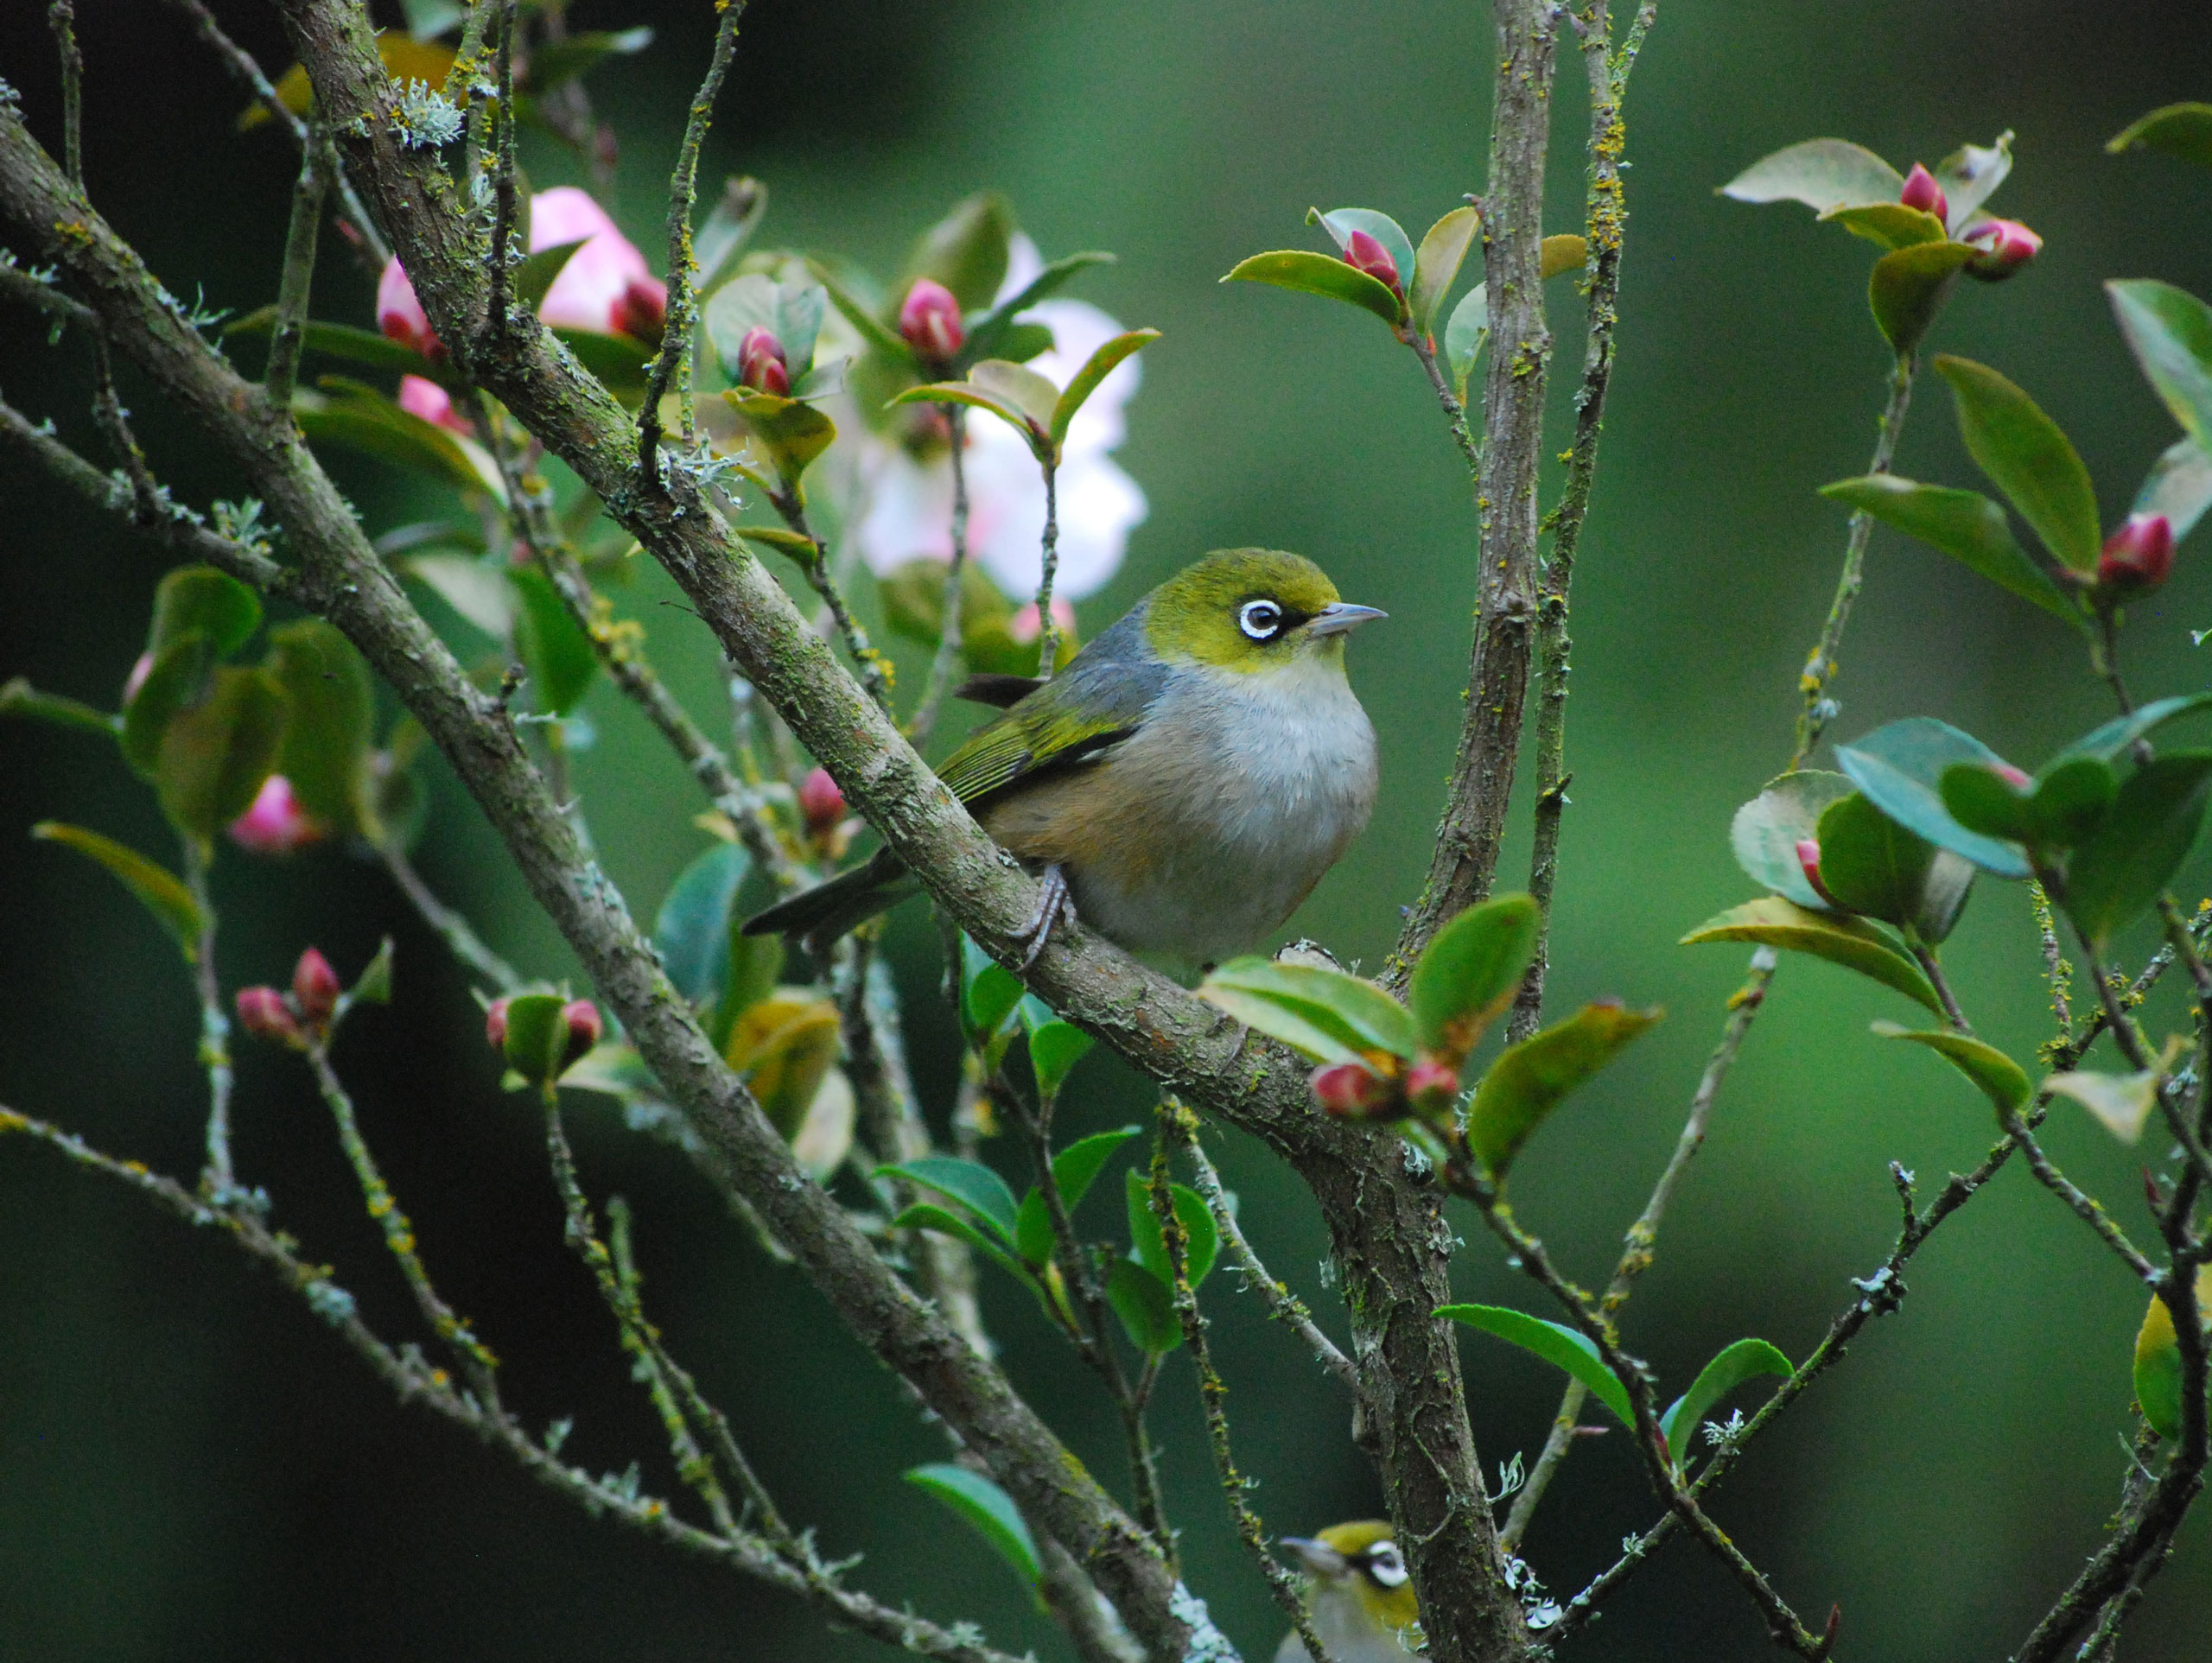 Photo by Michael Field-Dodgson: https://www.pexels.com/photo/a-small-bird-perched-on-the-branch-of-a-plant-6679593/